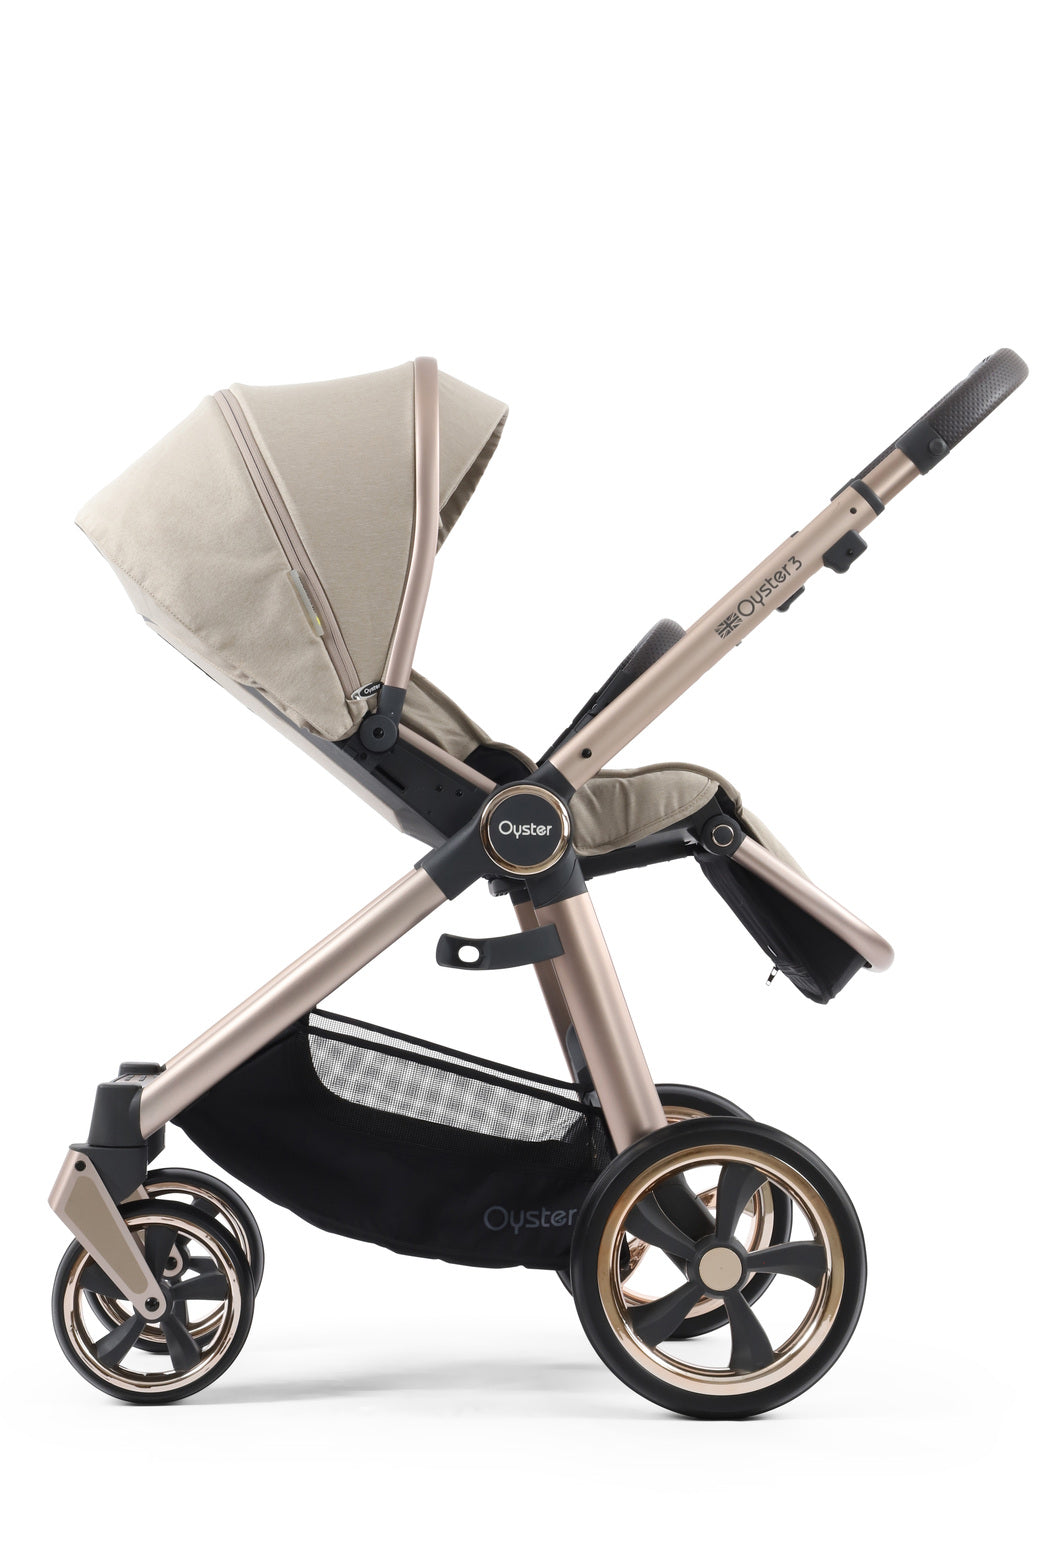 Babystyle Oyster 3 Ultimate 12 Piece Travel System Bundle - Creme Brulee -  | For Your Little One